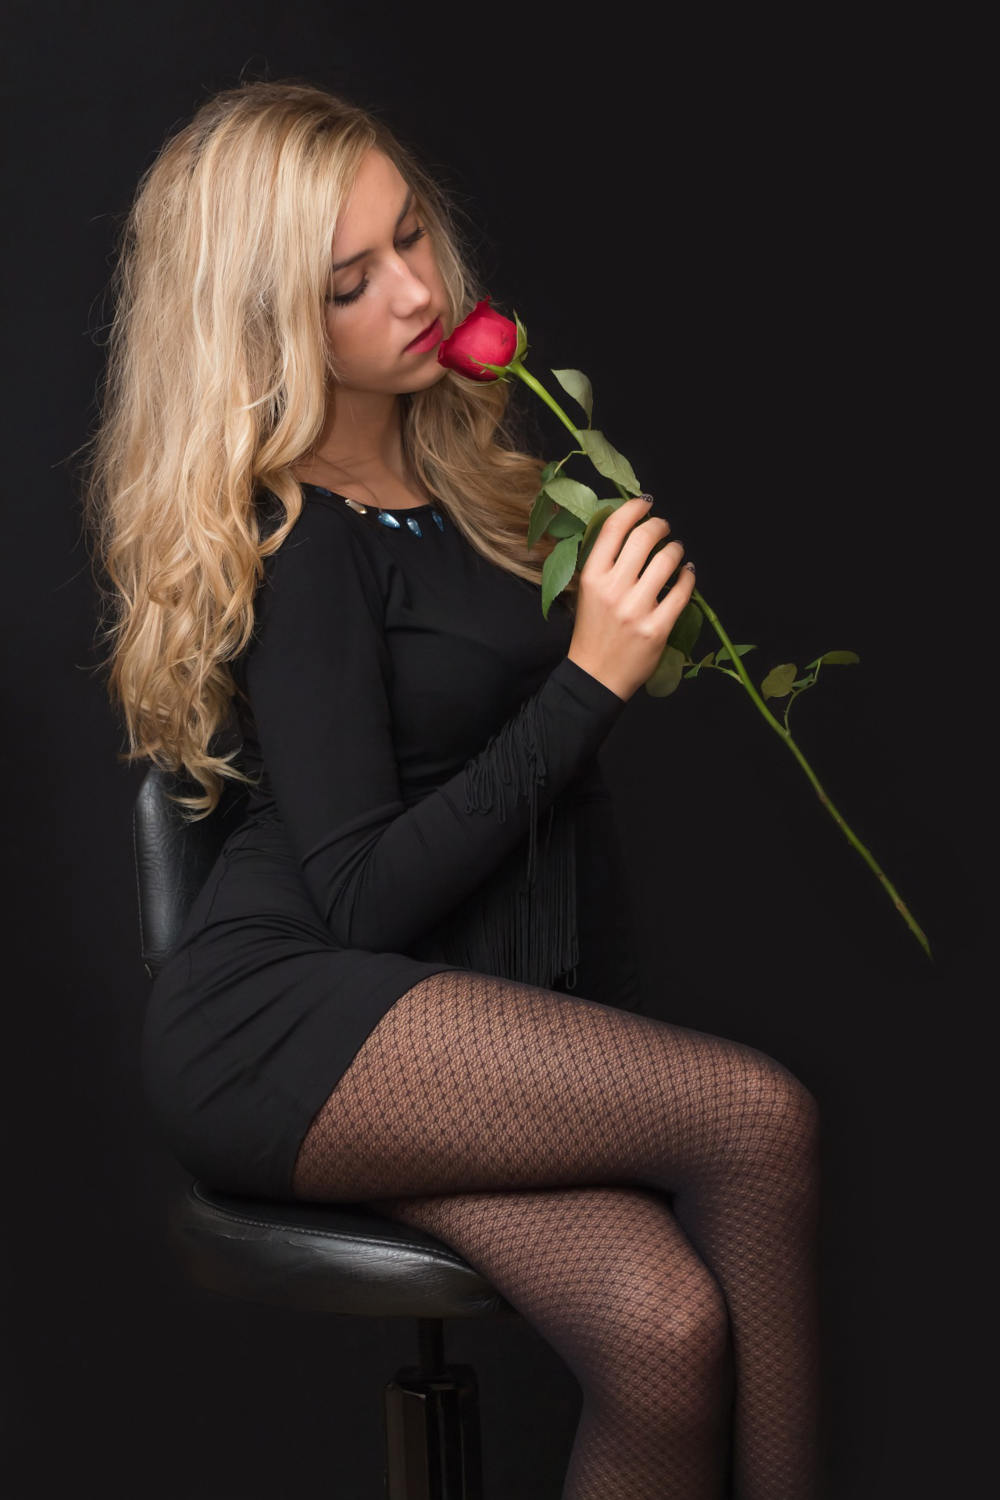 Girl holding a red rose wearing a black dress